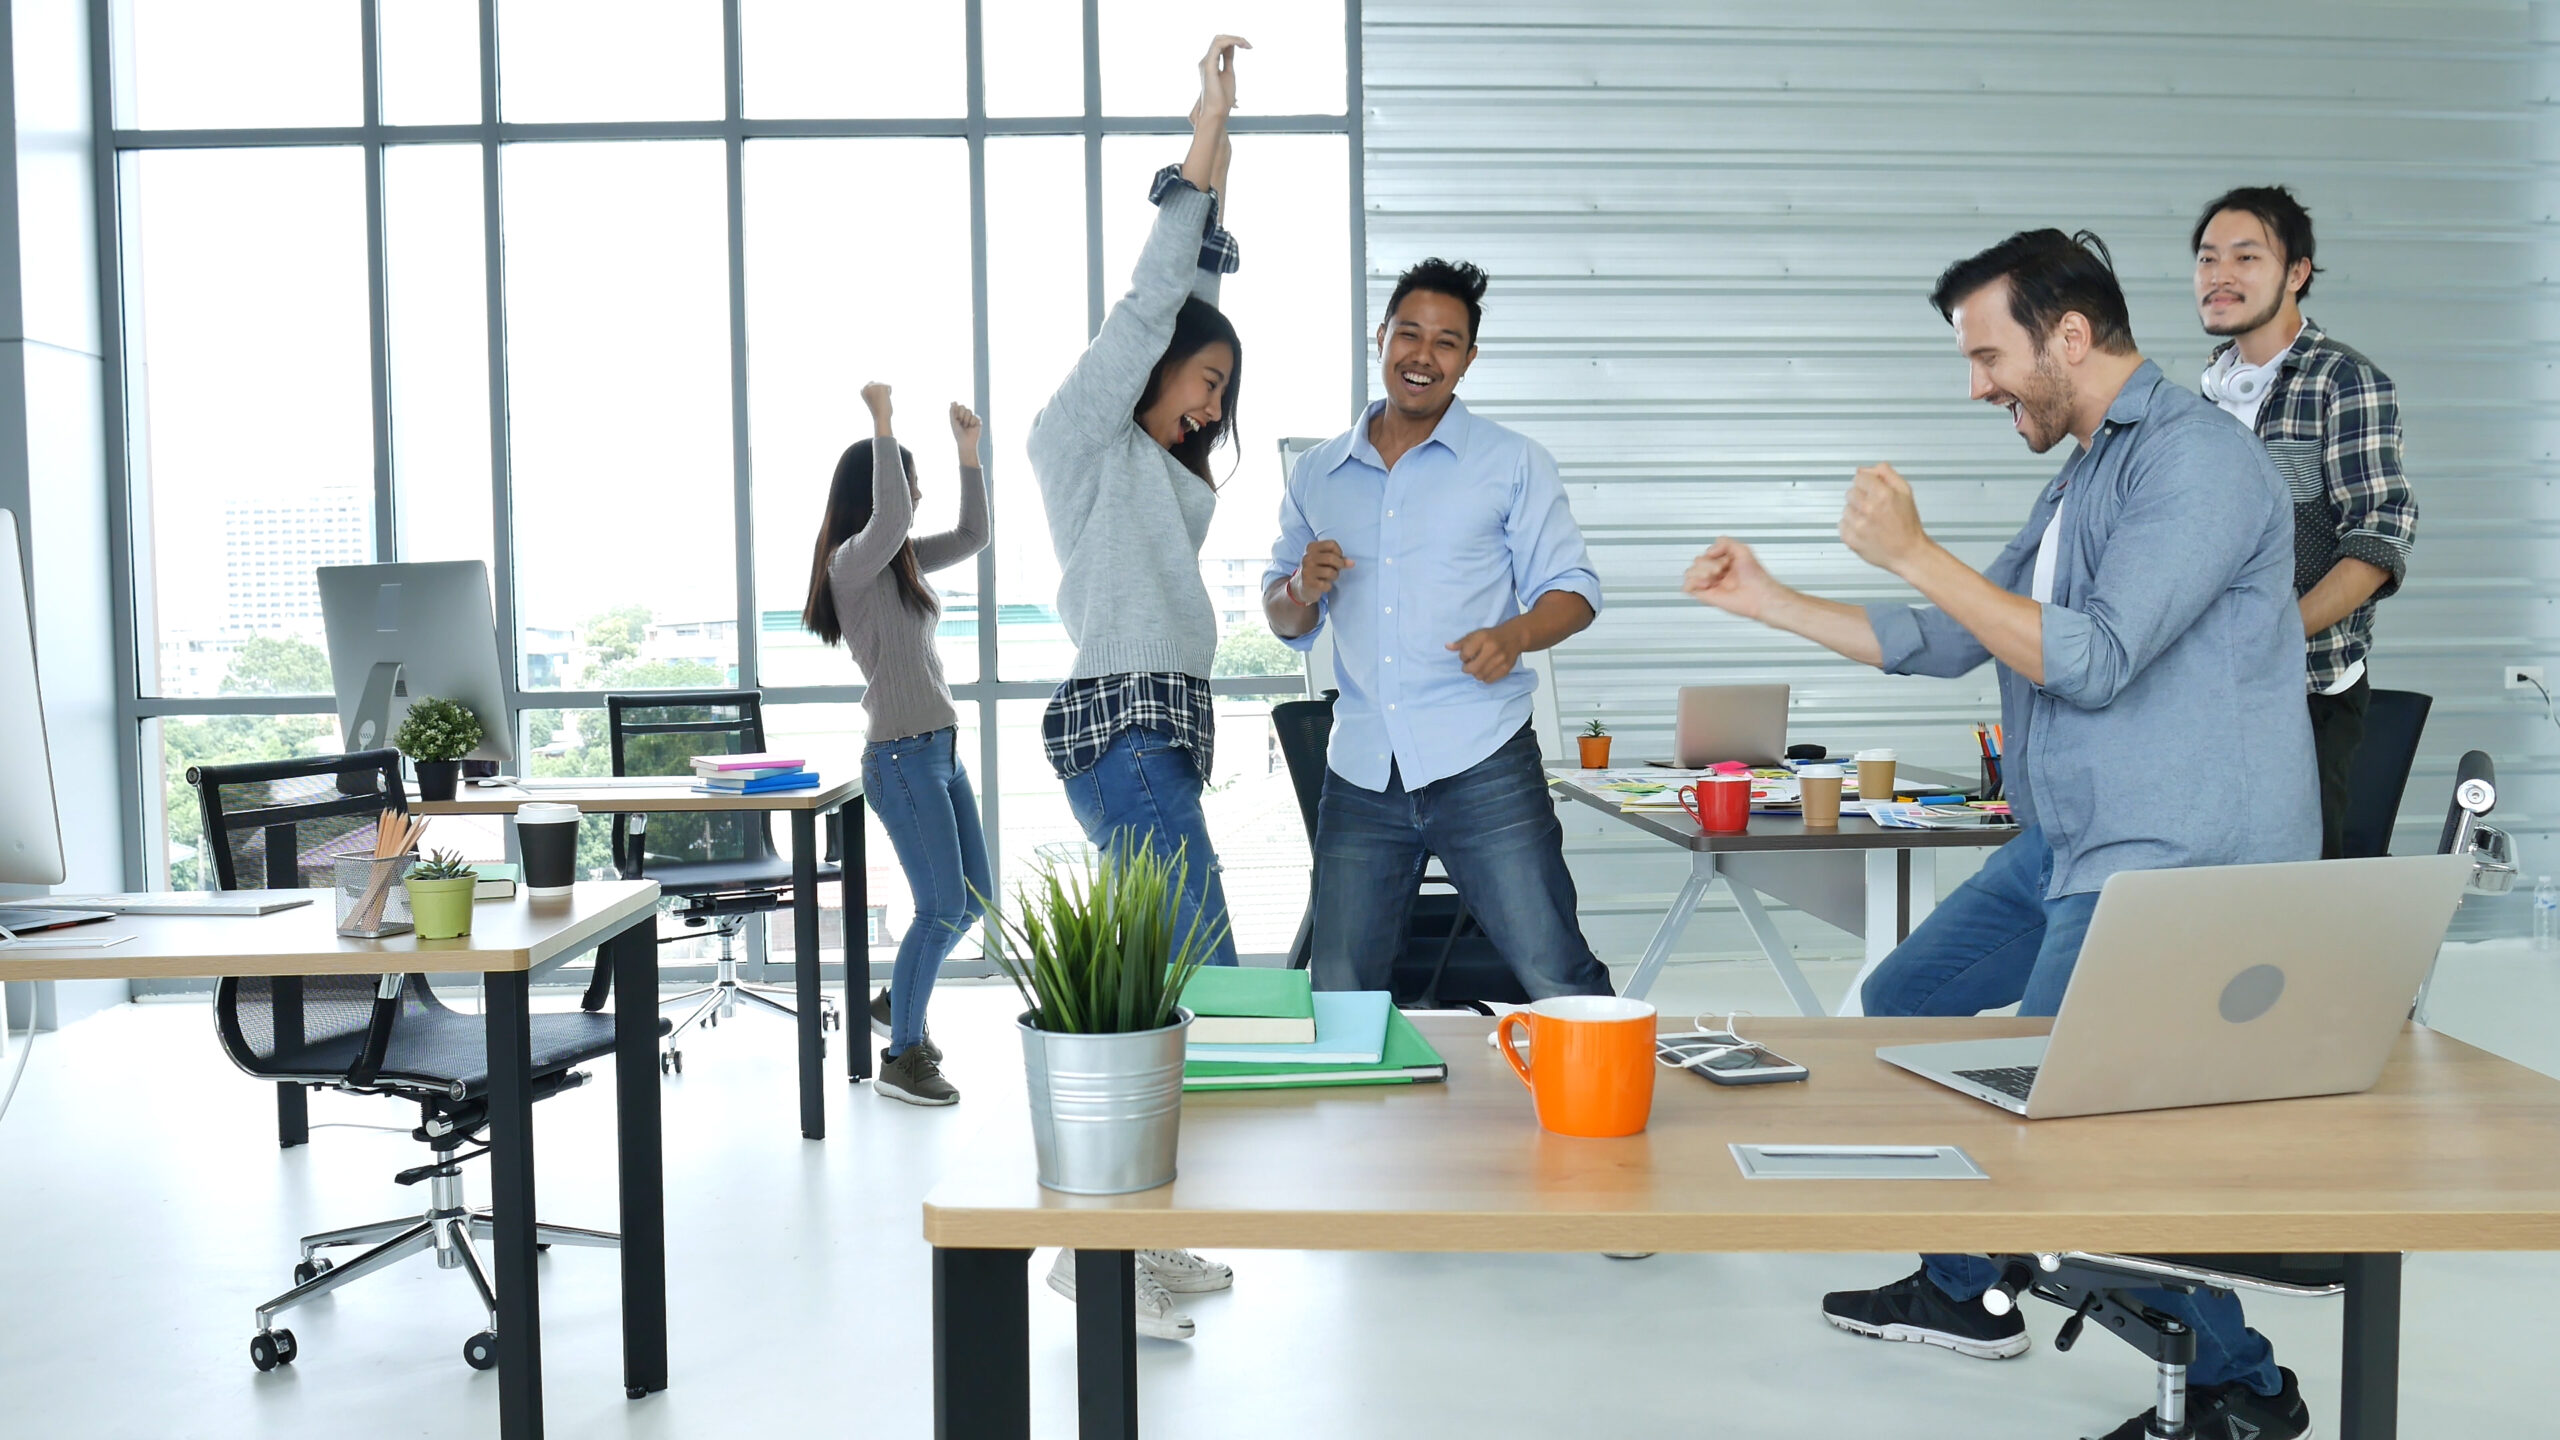 Creating More Joy in the Workplace | Employees in open office space, jumping for joy